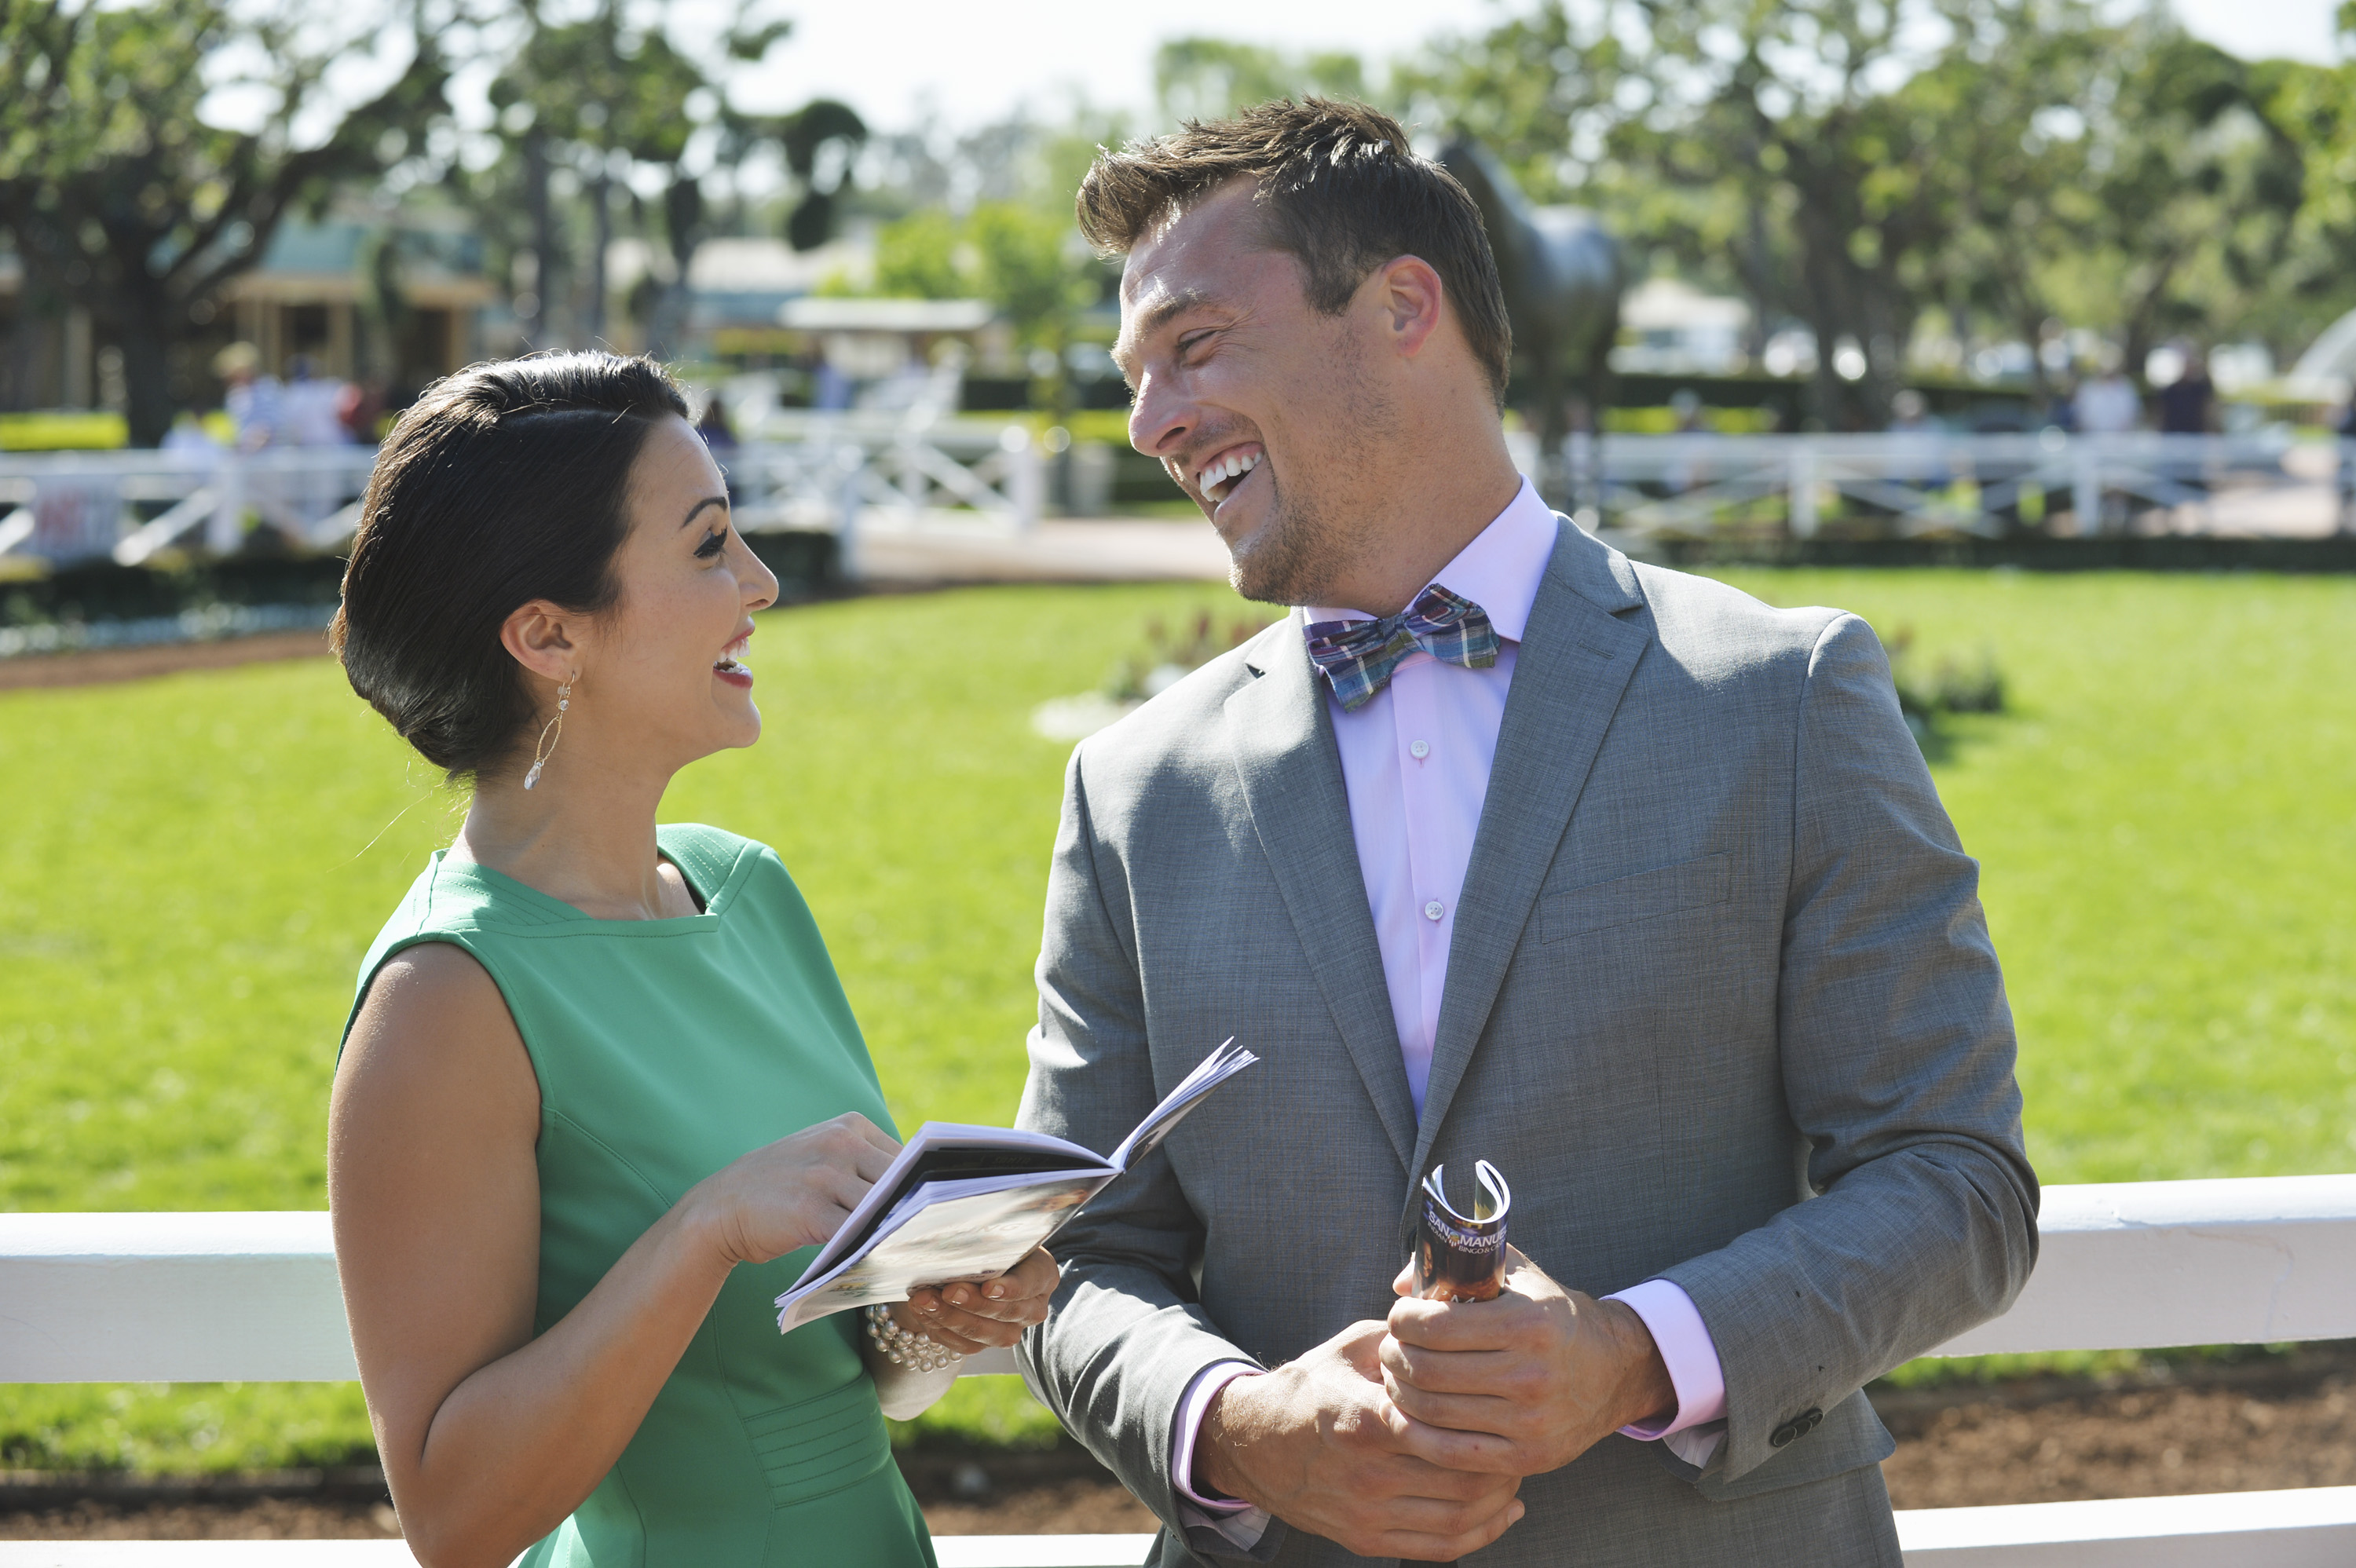 THE BACHELORETTE - "Episode 1002" - Andi treats Chris to a glamorous day of horse racing at Santa Anita Park, as the couple gets decked out in outfits reminiscent of the 1940's. They settle into their VIP seats with mint juleps and binoculars ready to see if their bets pay off. That night, they enjoy a special evening, slow dancing to the songs of "This Wild Life" during a private concert. Does this mean their relationship is on a fast track? - on "The Bachelorette," MONDAY, MAY 26 (8:00-10:01p.m., ET) on the ABC Television Network. (Photo by Todd Wawrychuk/ABC via Getty Images) (Todd Wawrychu—ABC/ Getty Images)